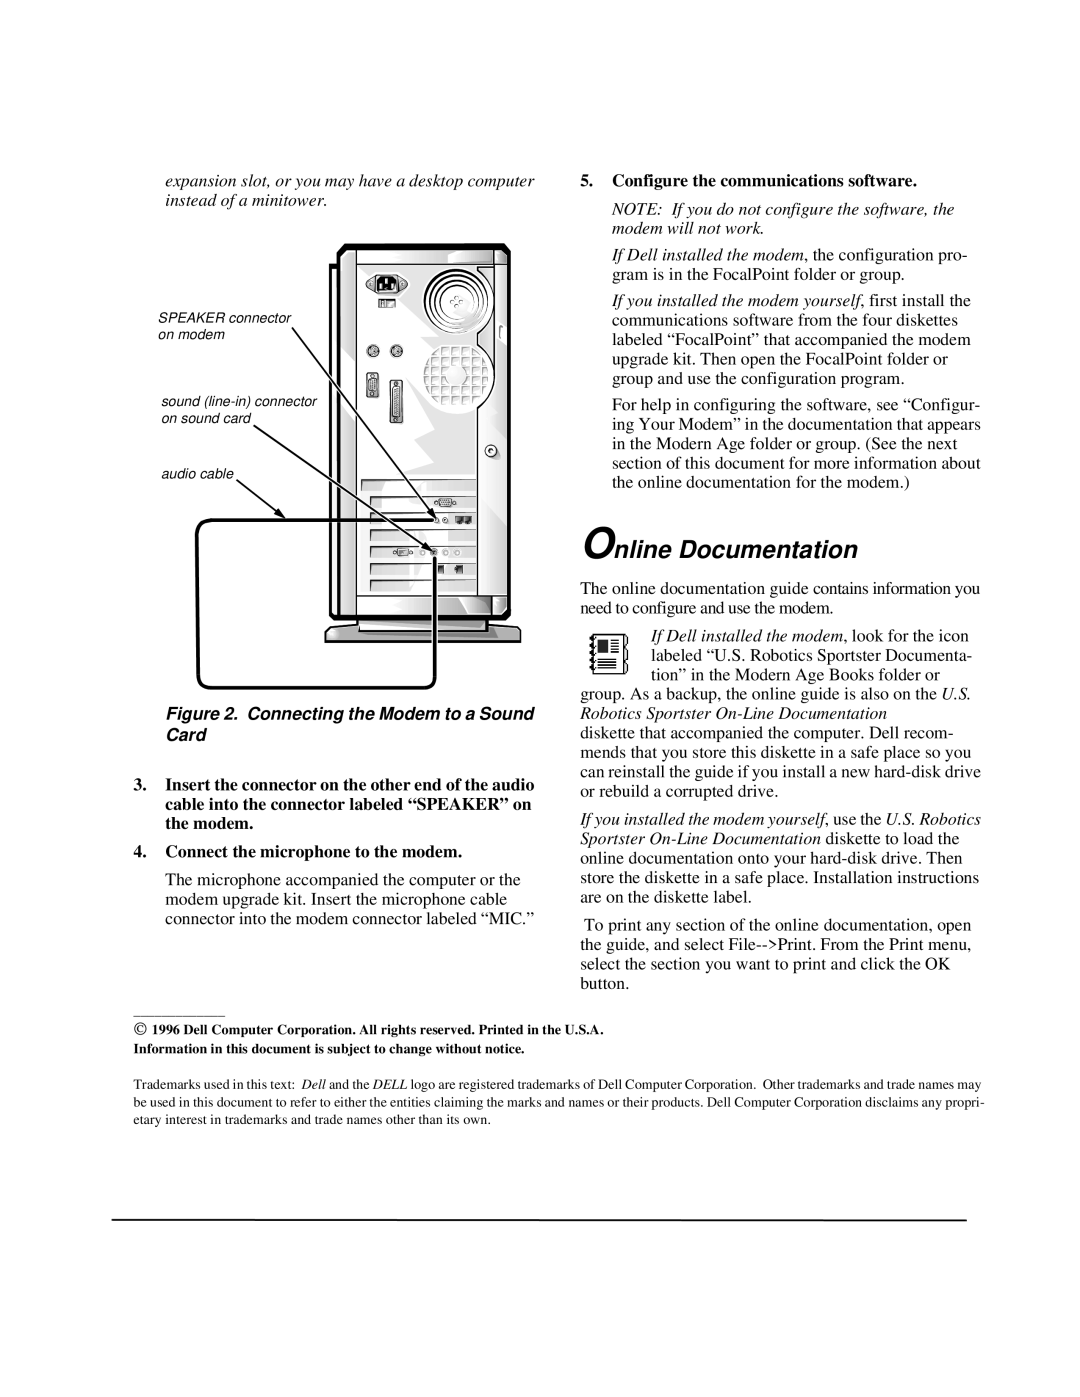 Dell P/N 52037 manual Online Documentation, Connecting the Modem to a Sound Card, Connect the microphone to the modem 